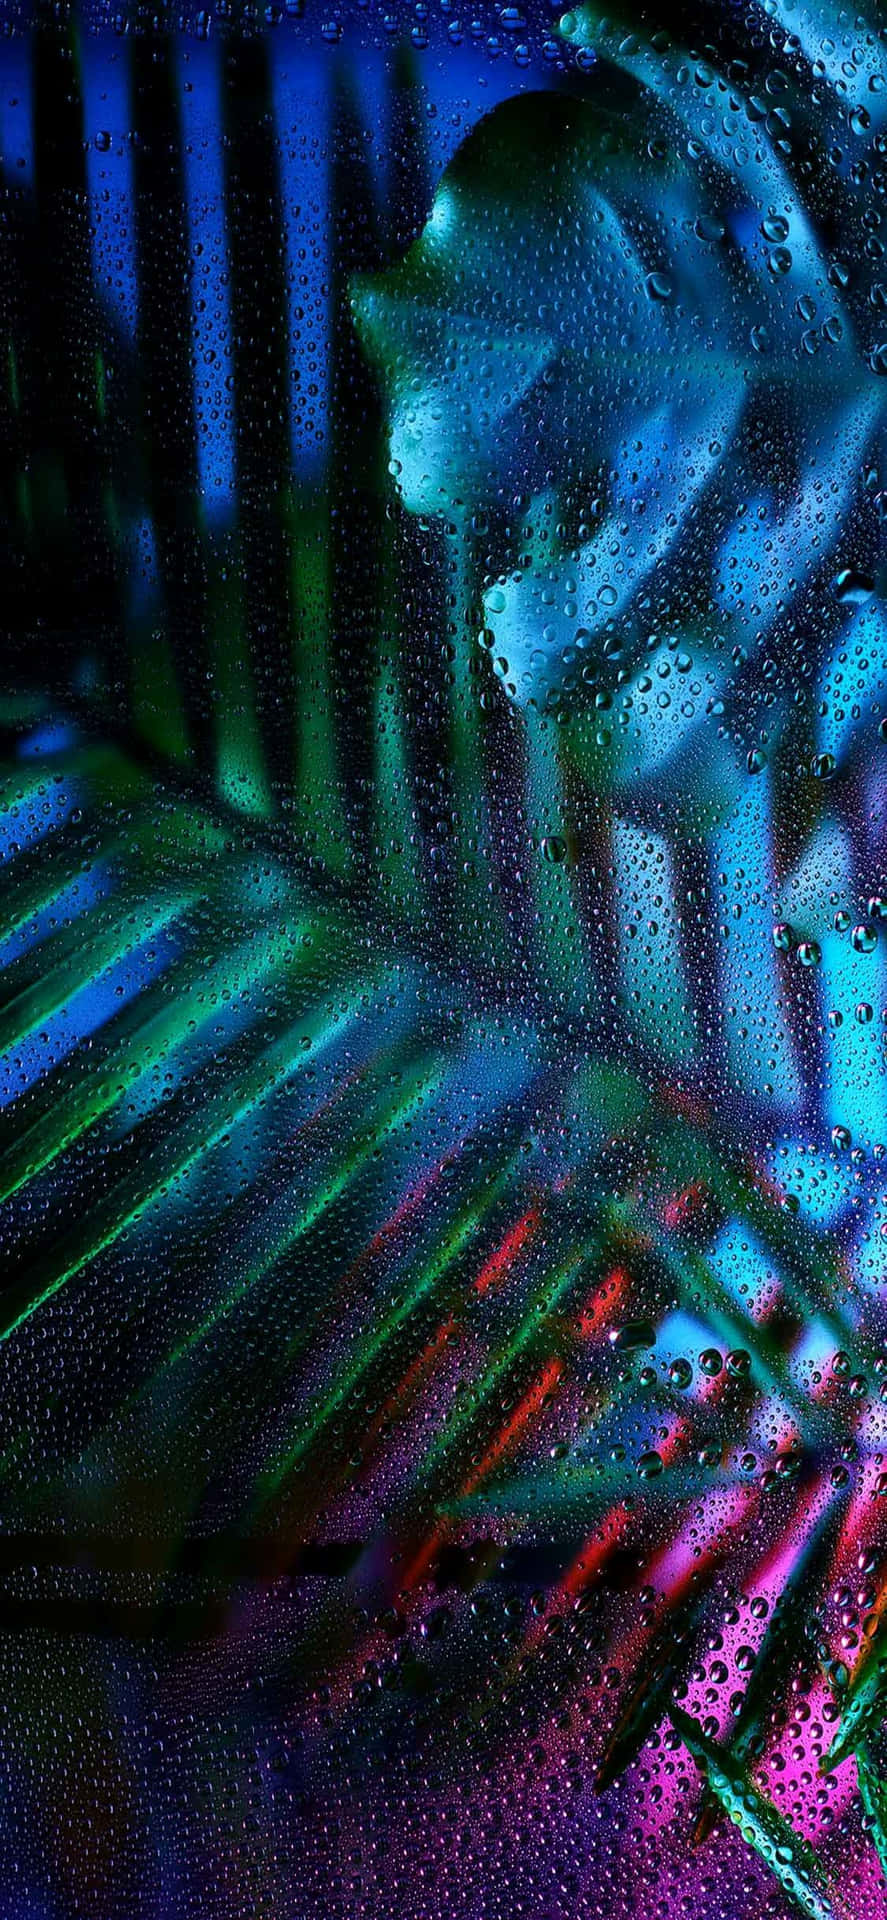 A Colorful Tropical Leaf With Water Droplets On It Background